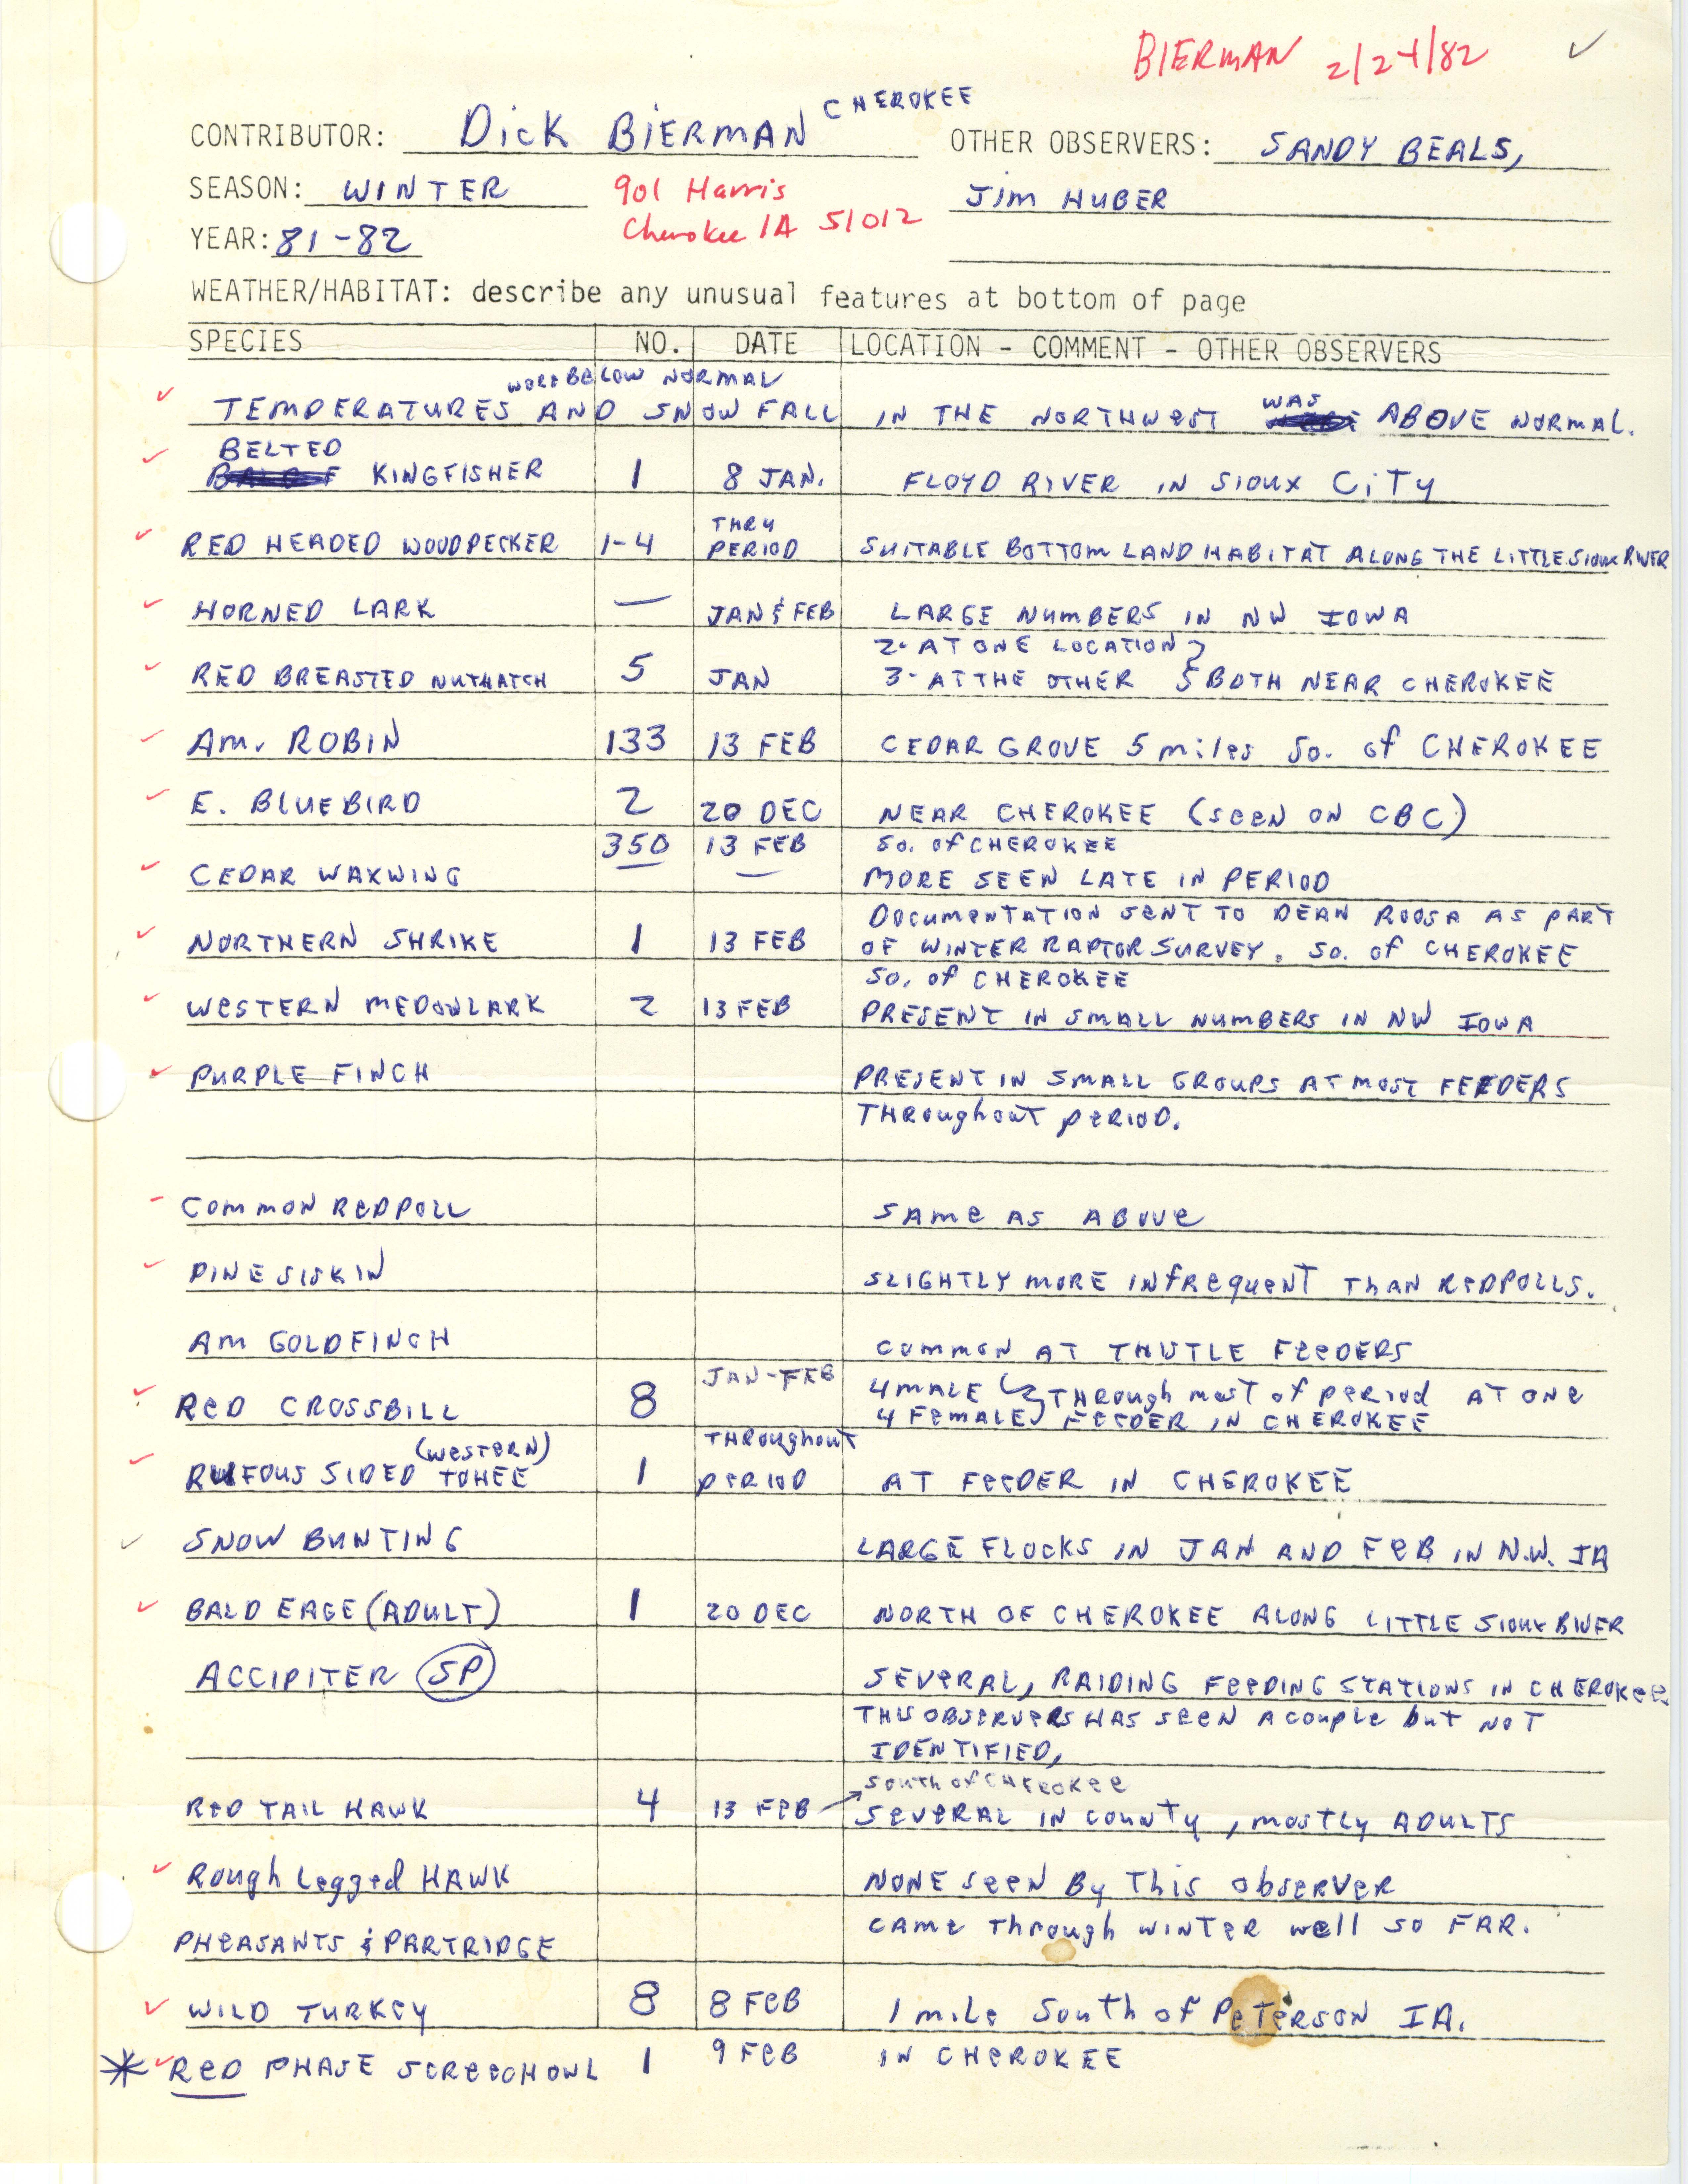 Field notes contributed by Dick Bierman, February 24, 1982